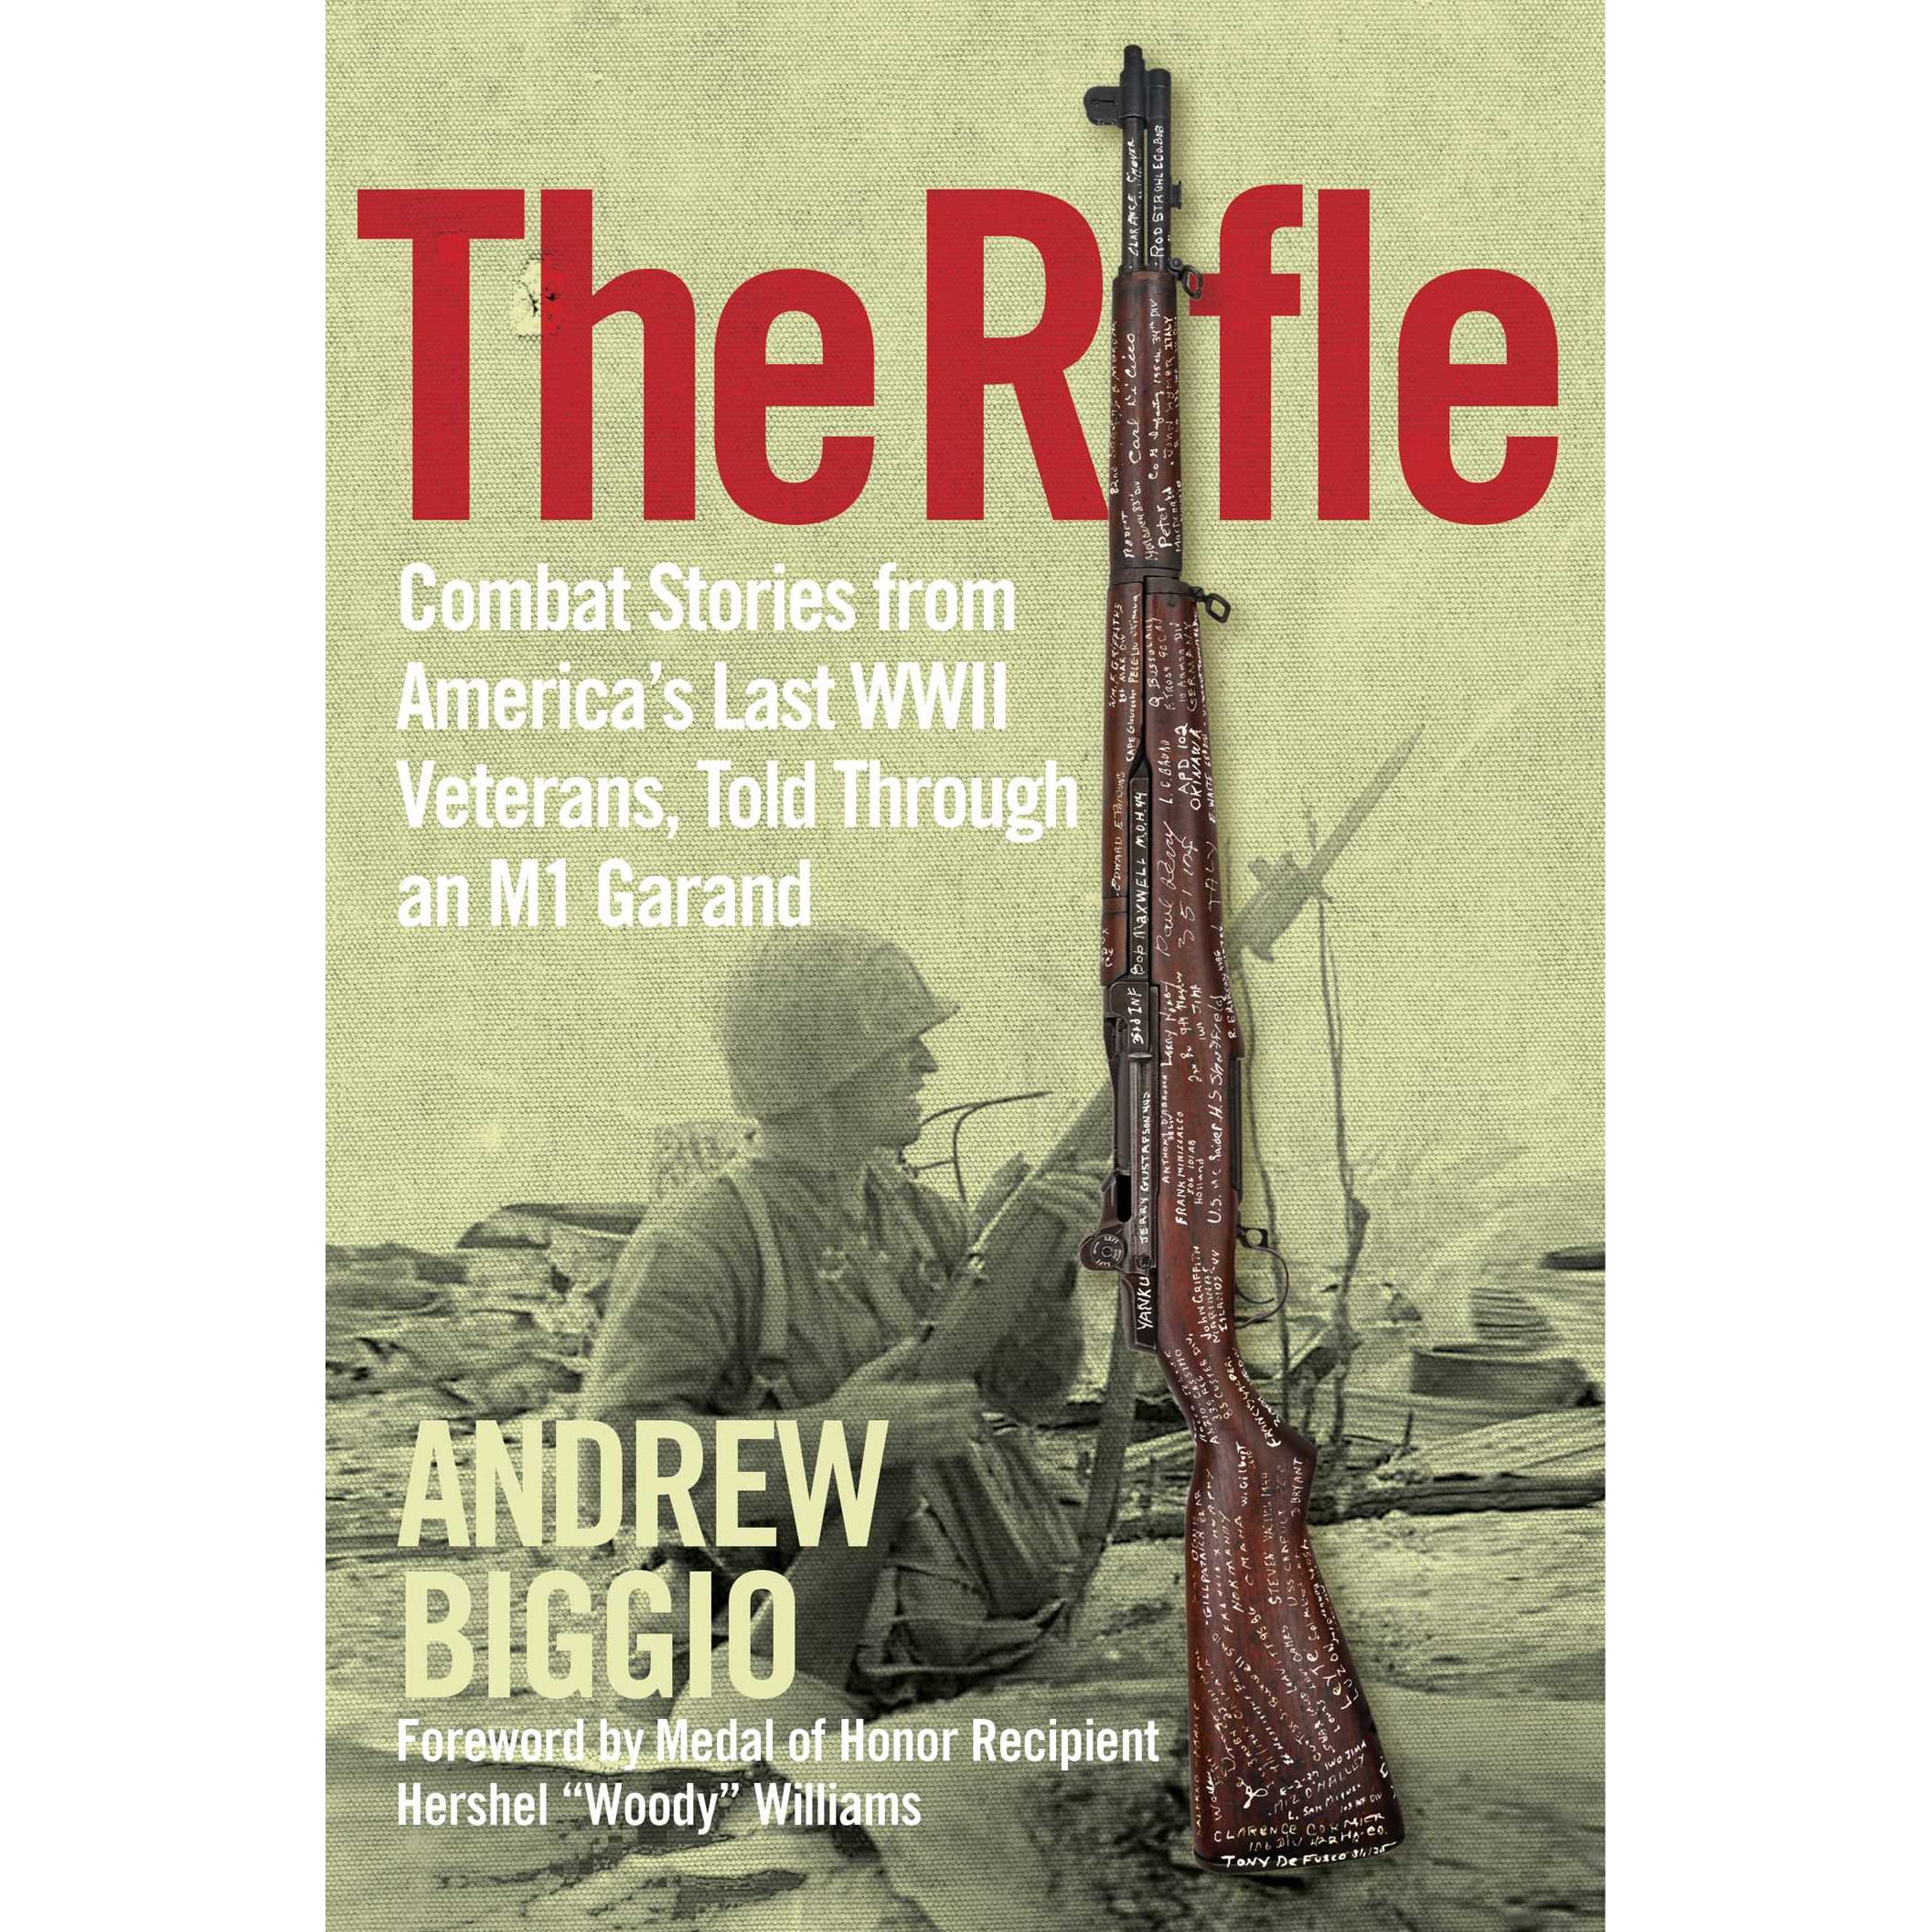 Reviving Lost WW2 Stories With An M1 Rifle